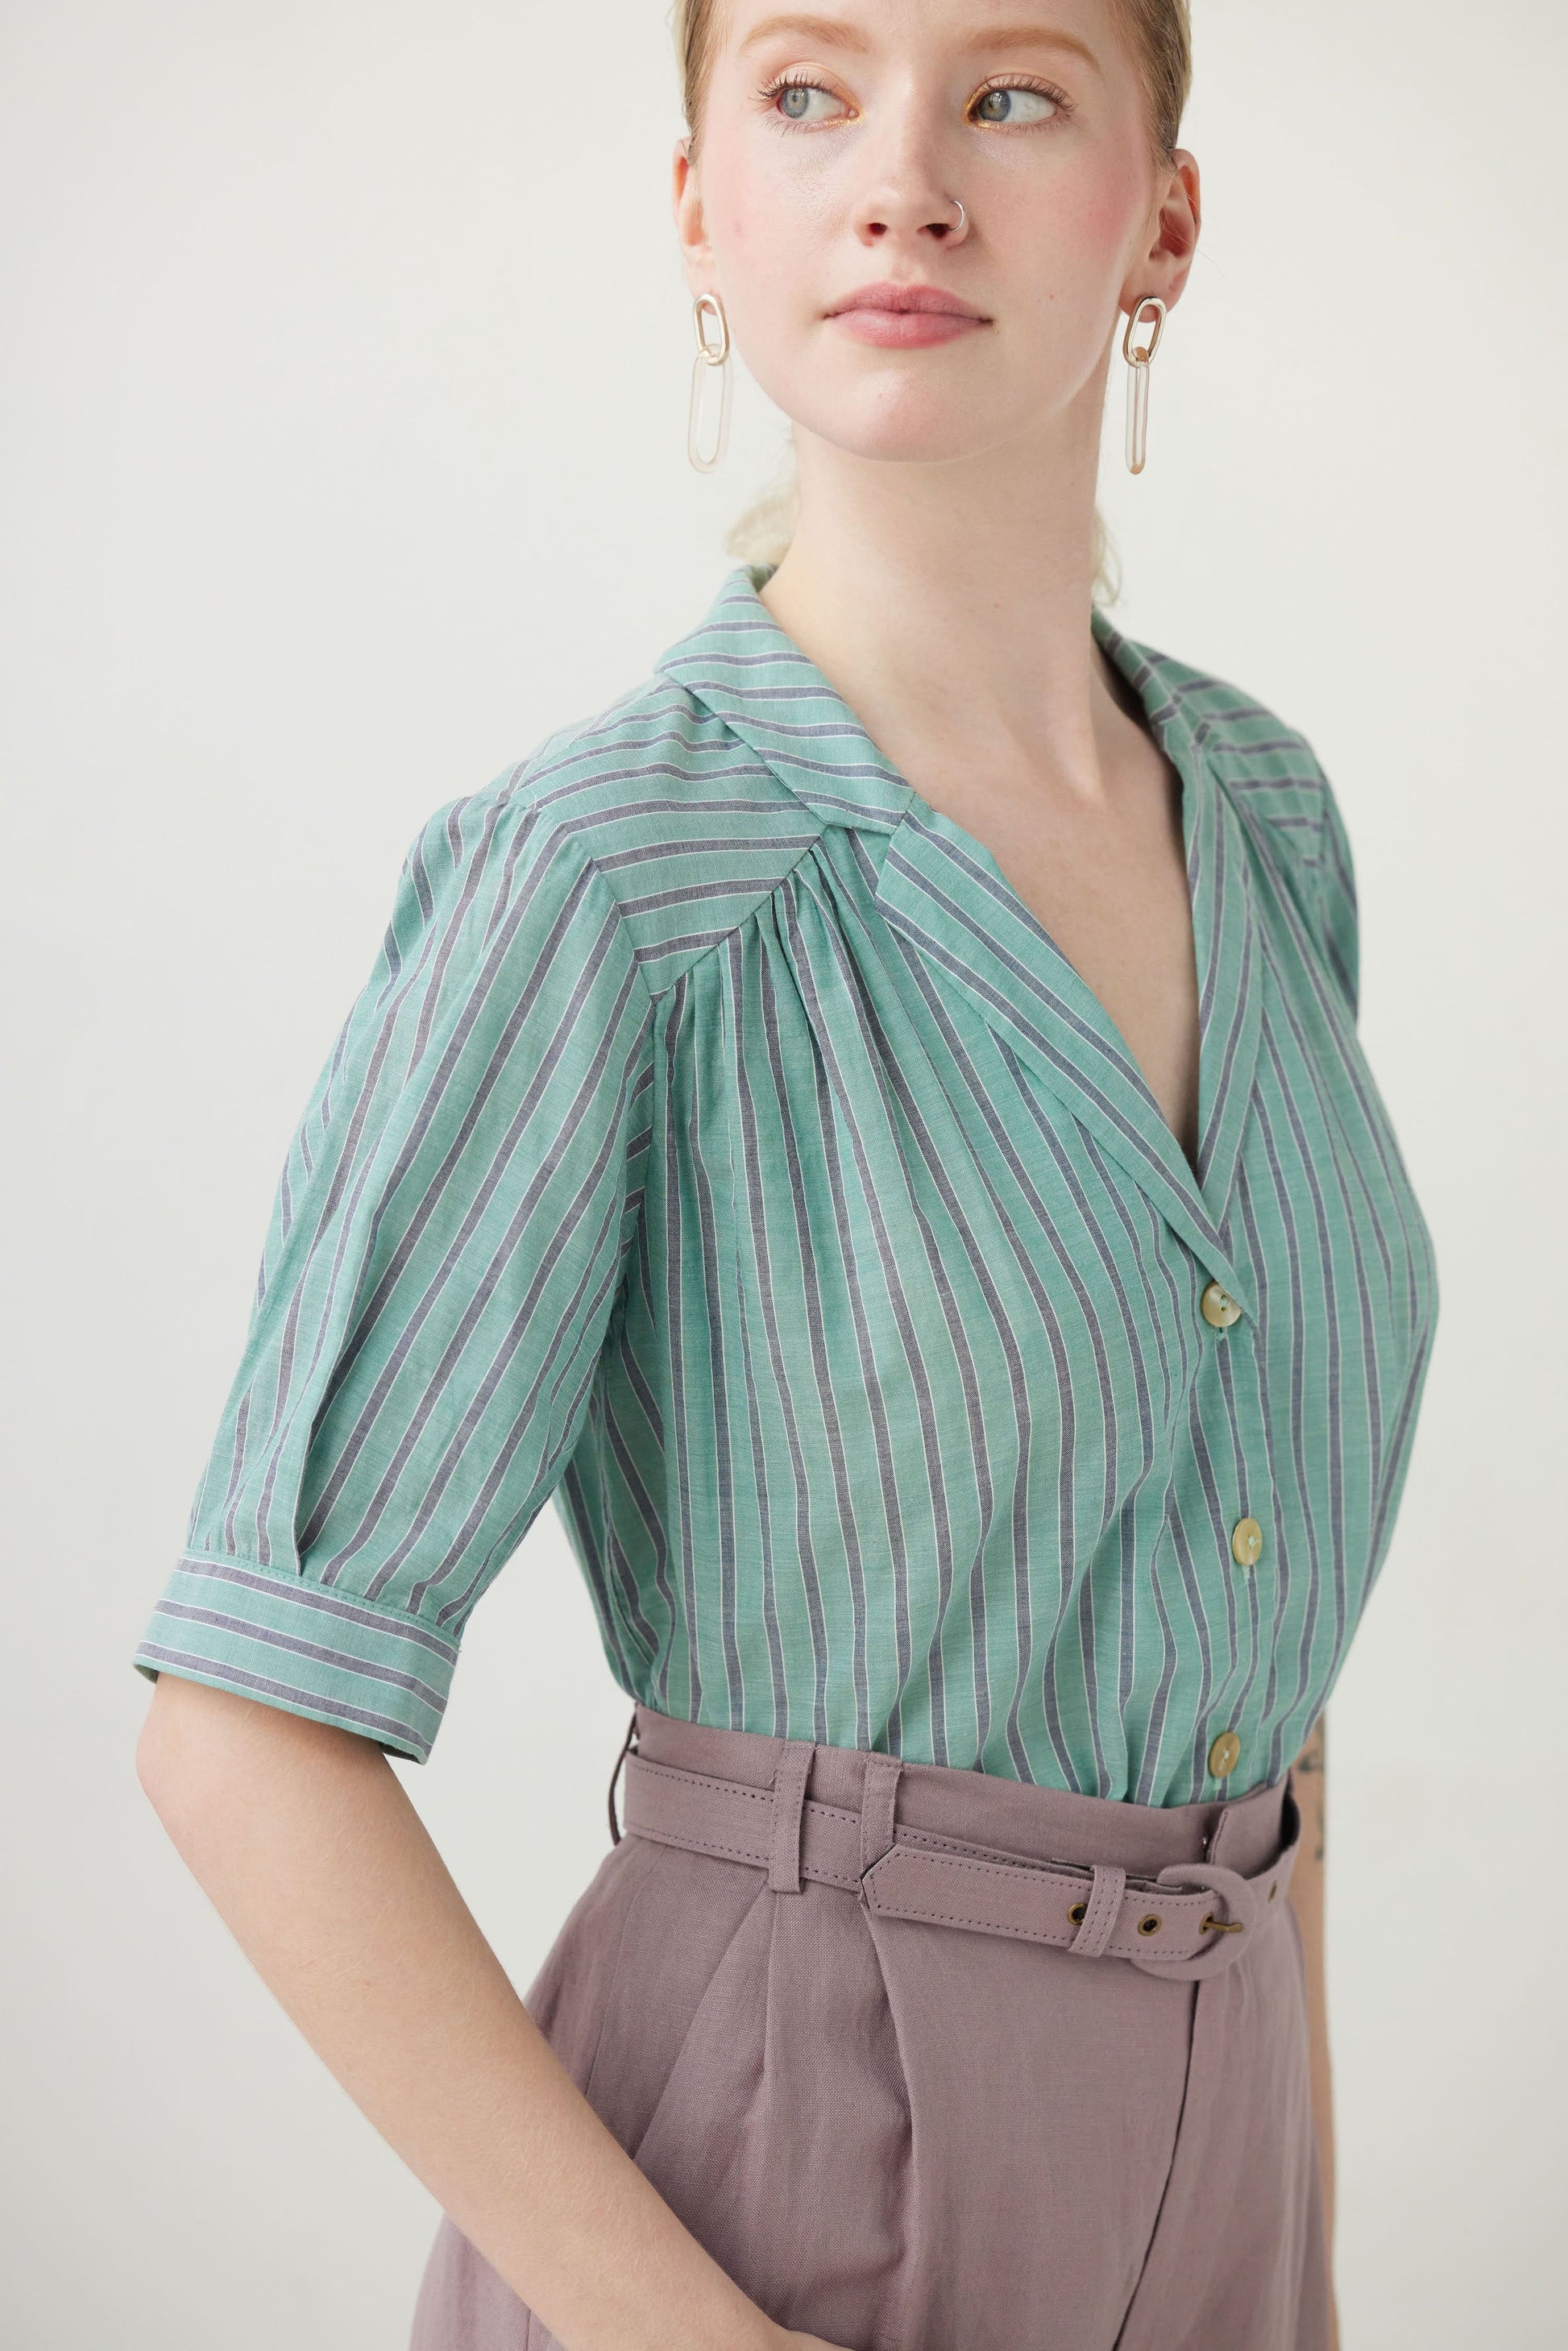 Katherine Blouse in Striped Cotton Tops CHRISTINE ALCALAY Green Stripe Small 